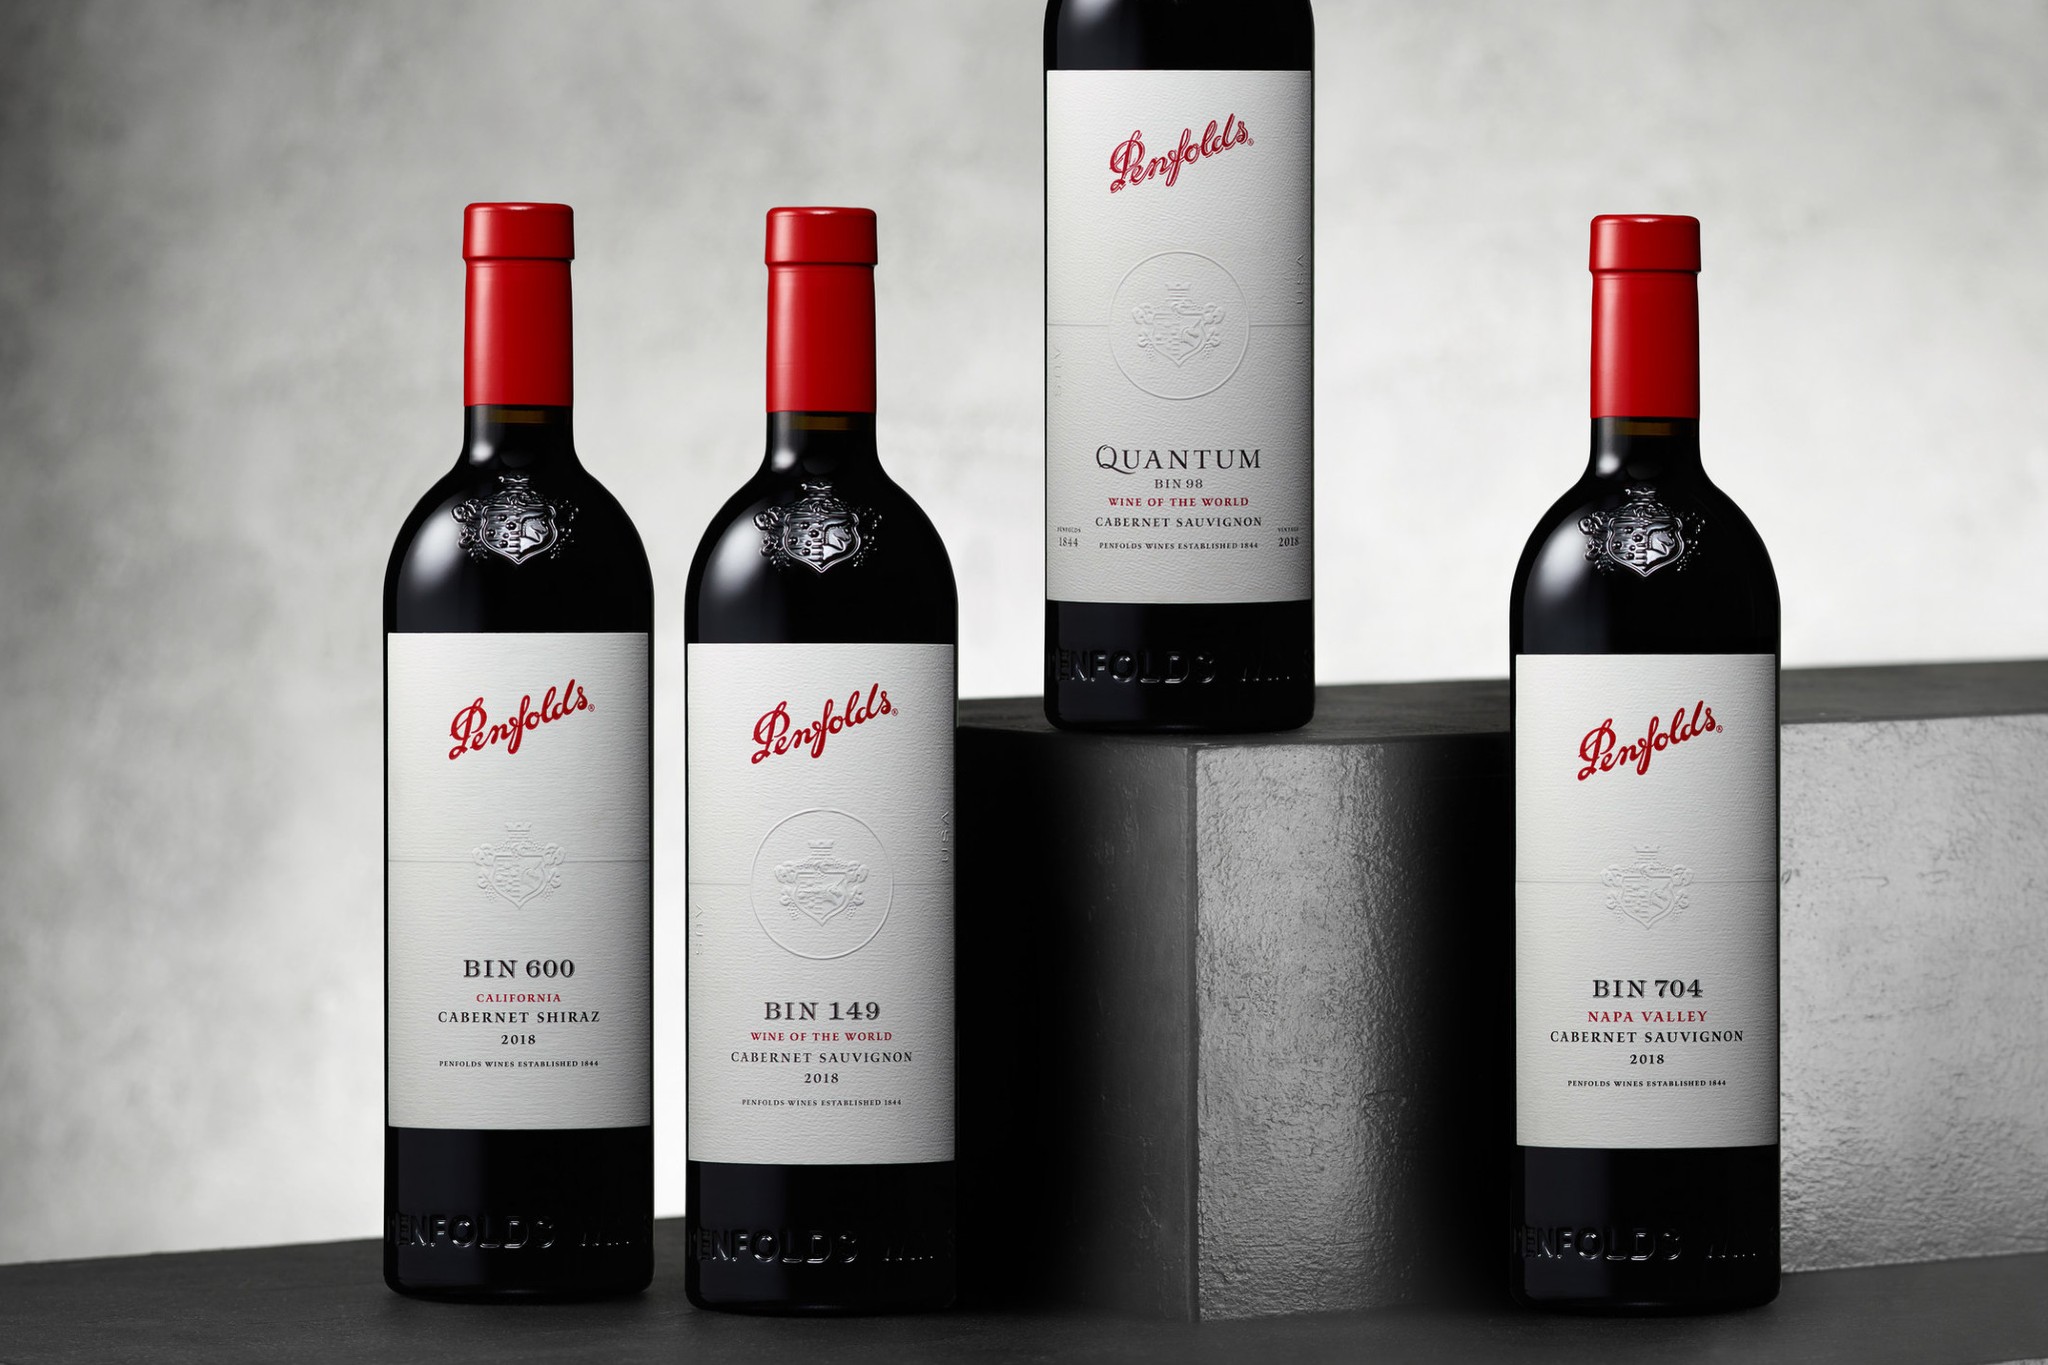 As Penfolds launches its Californian wine, will it diversify products for Chinese market?